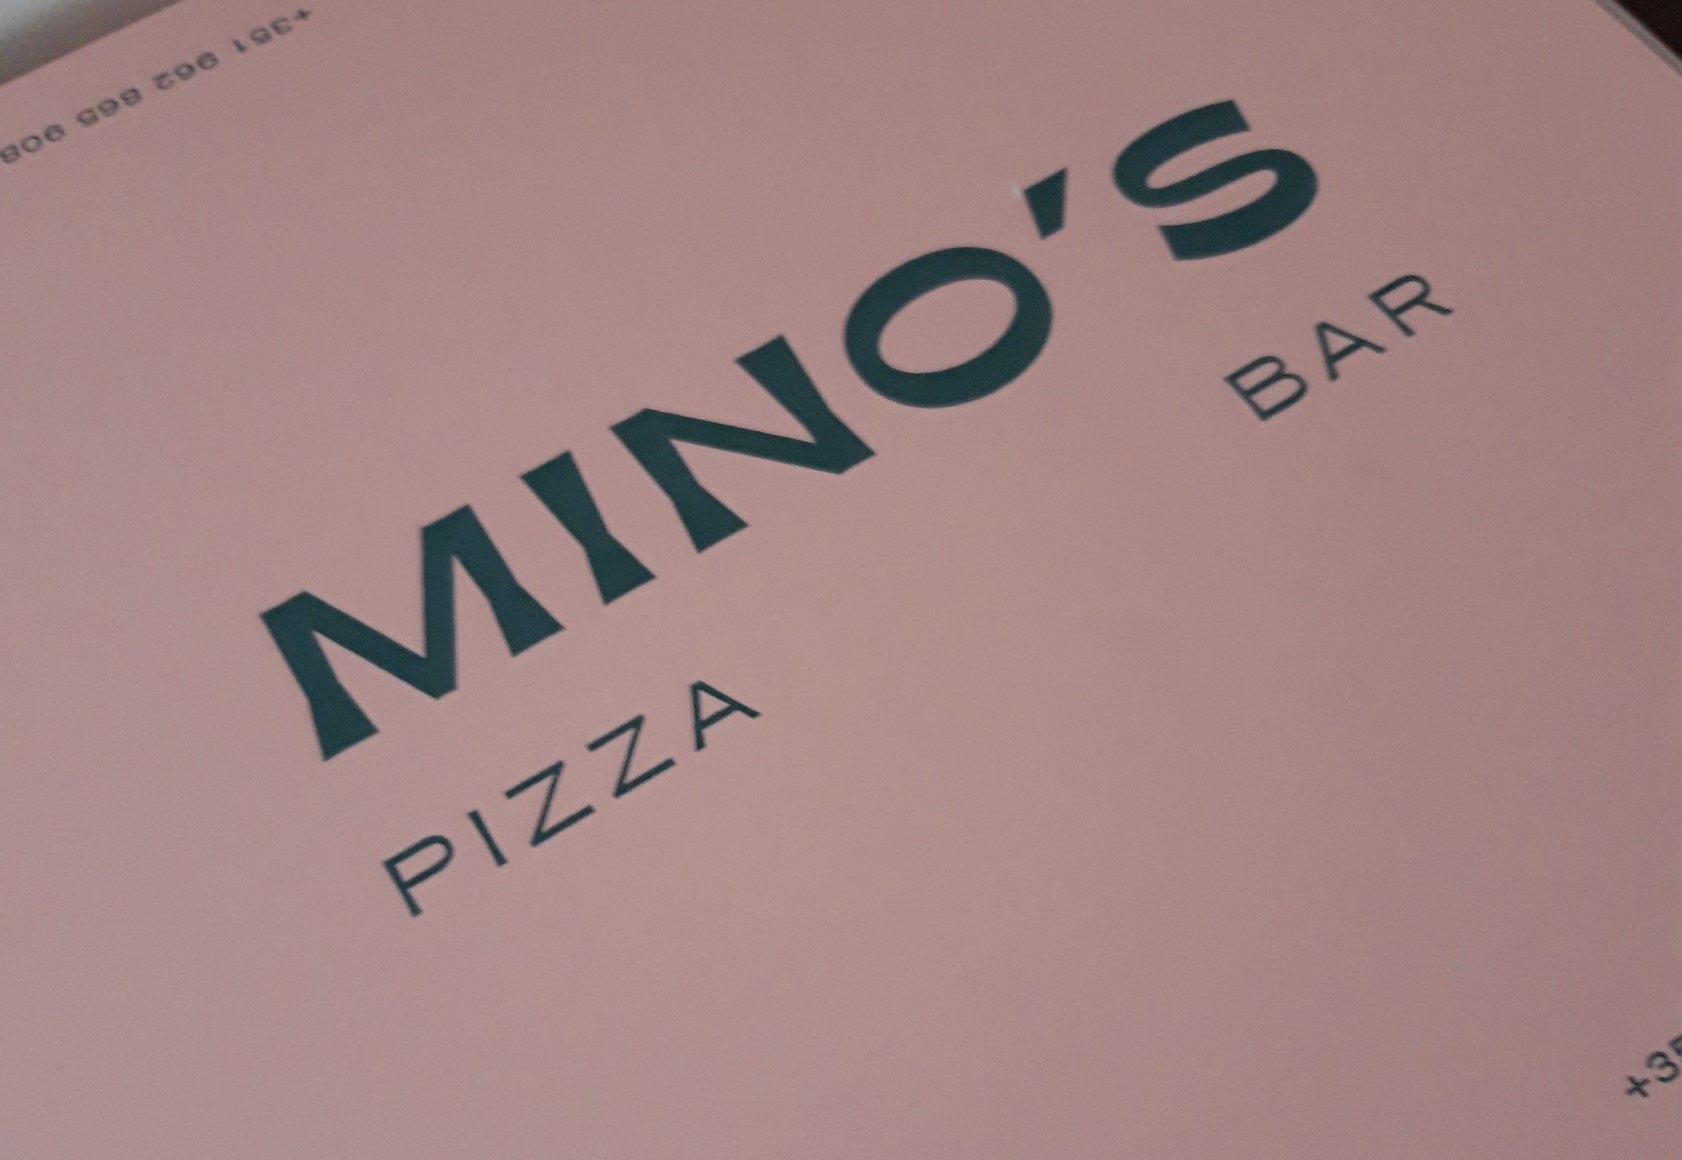 pink pizza box which reads Mino's Pizzeria in turquoise letters